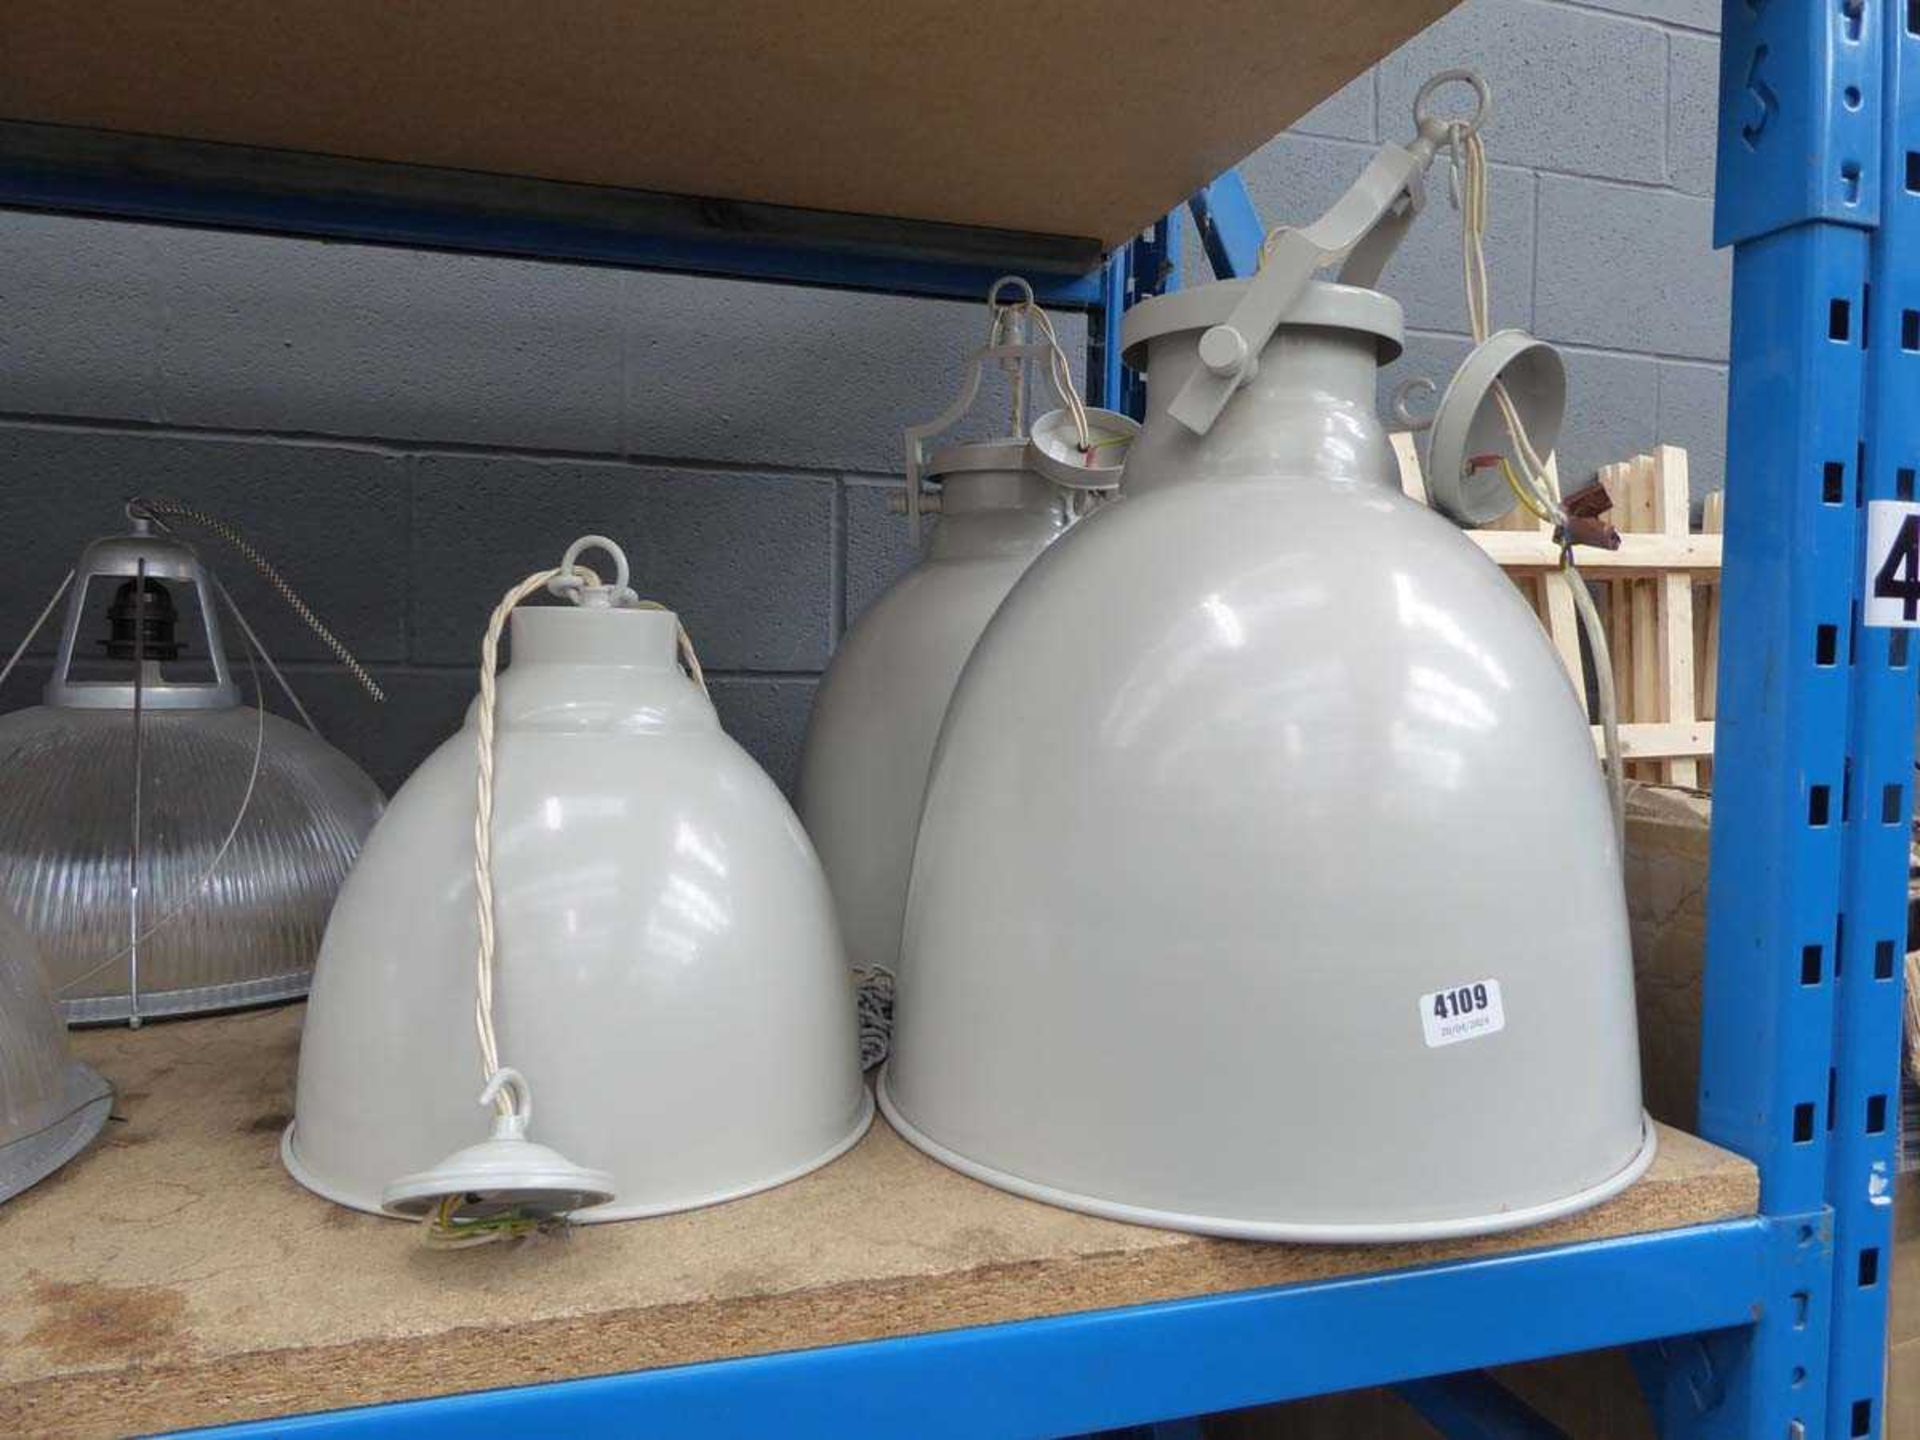 2 large and 2 small grey lamps